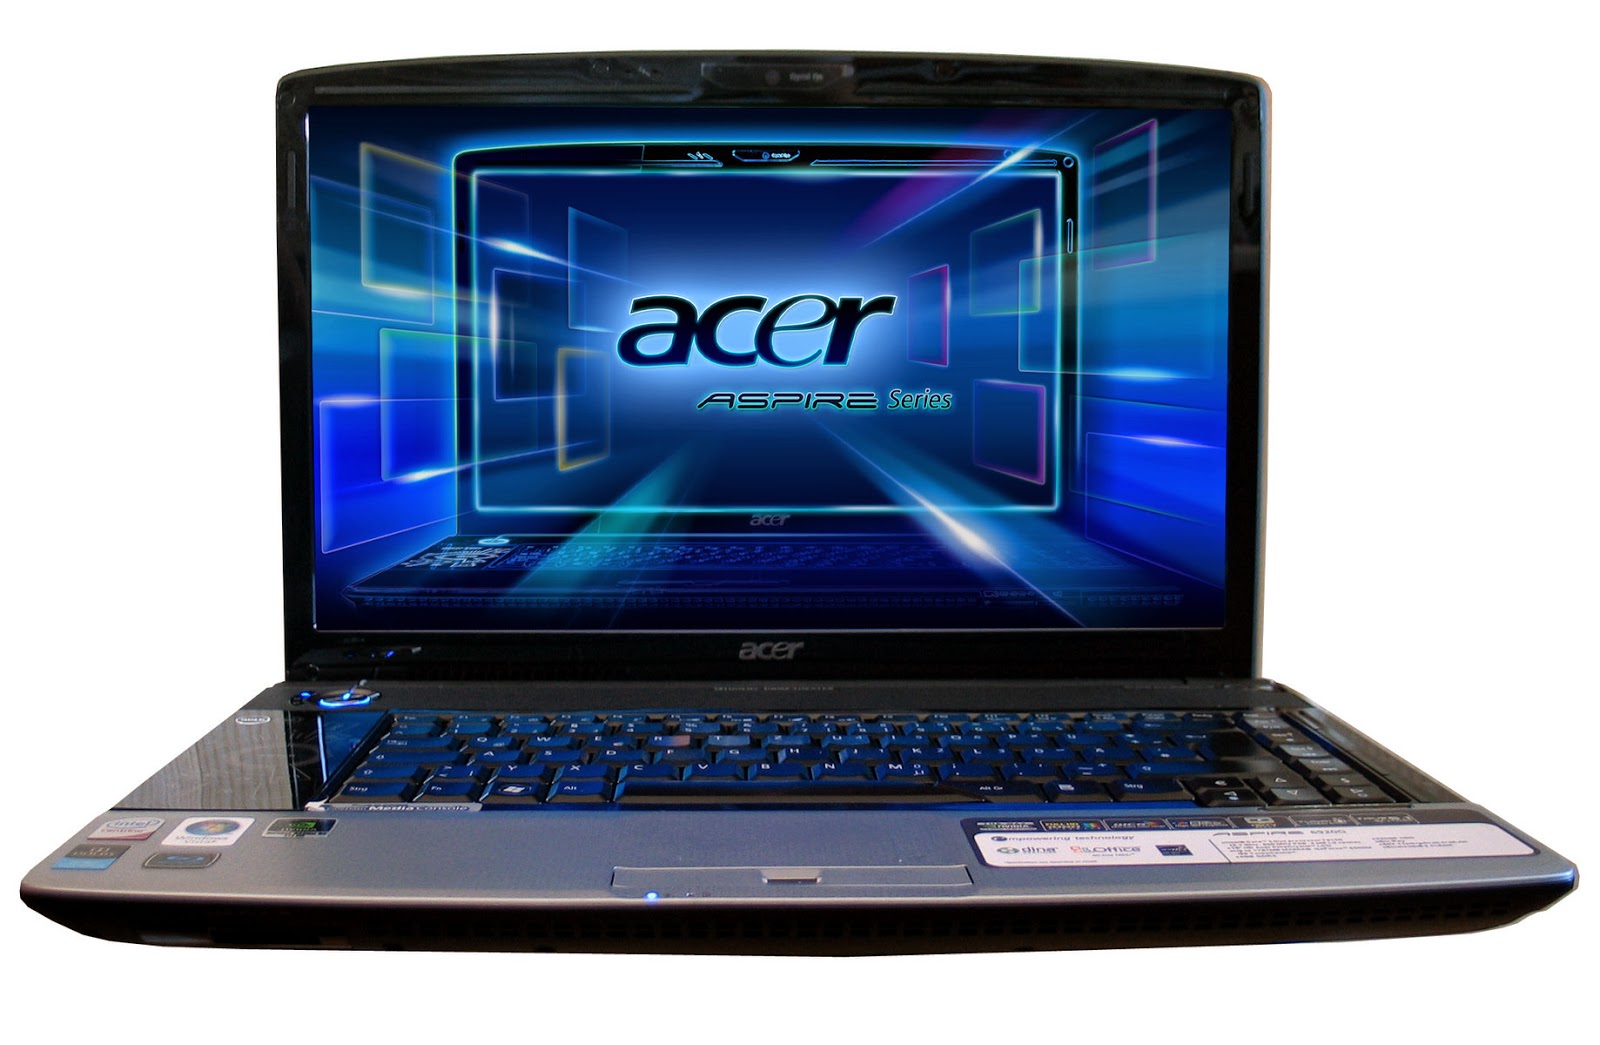 acer graphics driver for windows 7 ultimate free download